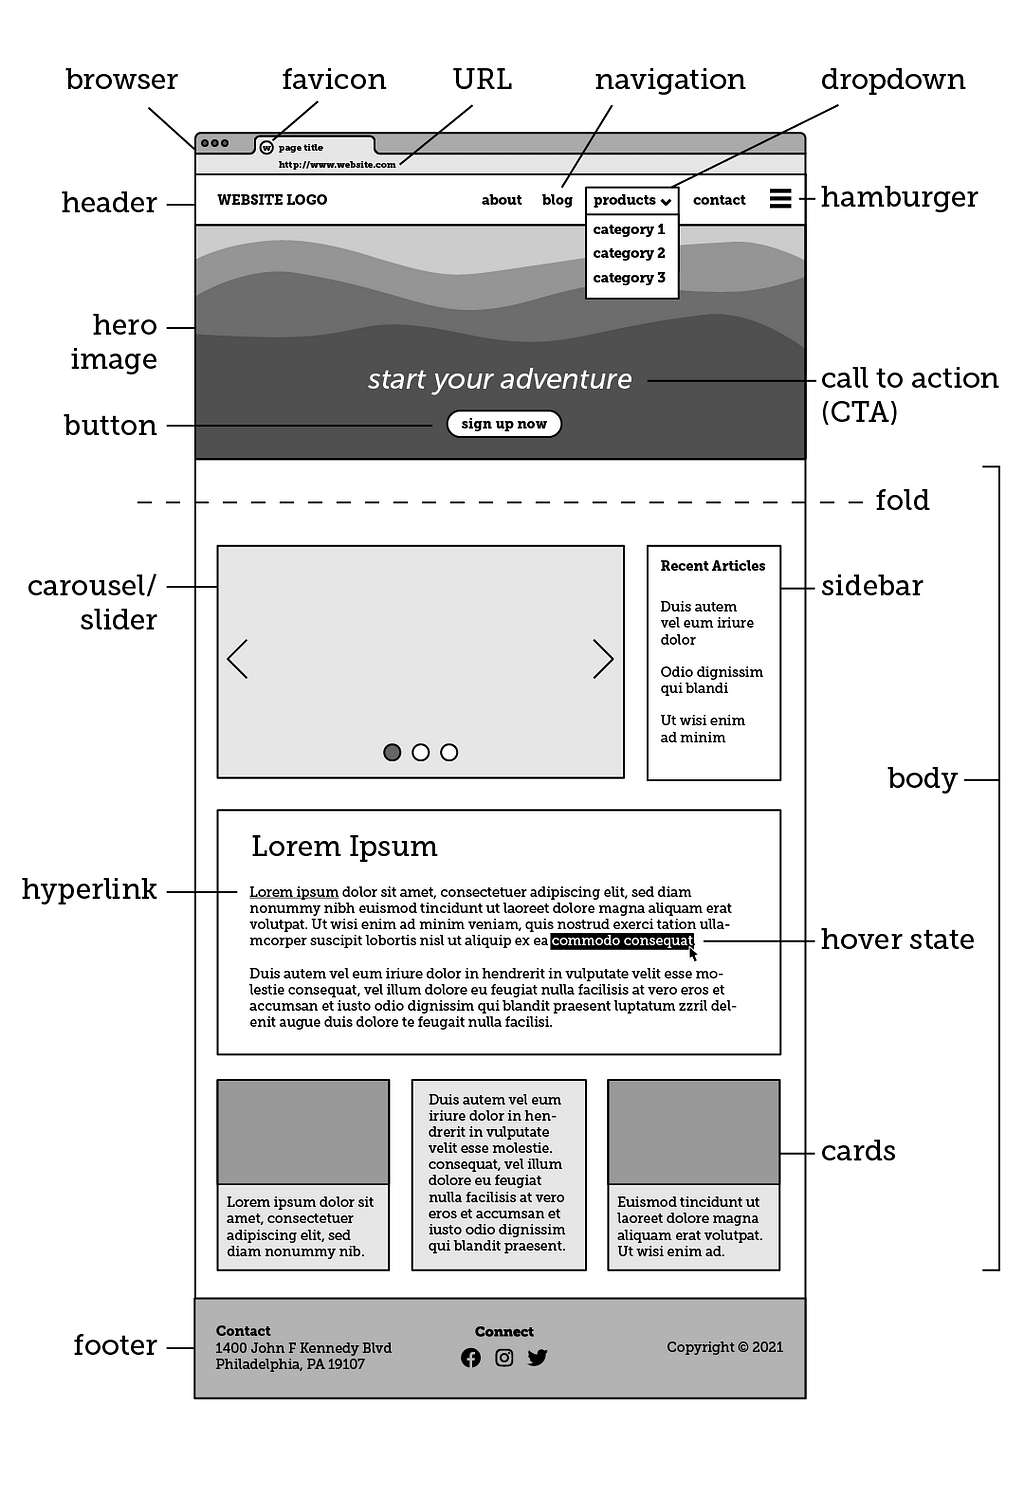 Diagram of website with labels for different website terms.